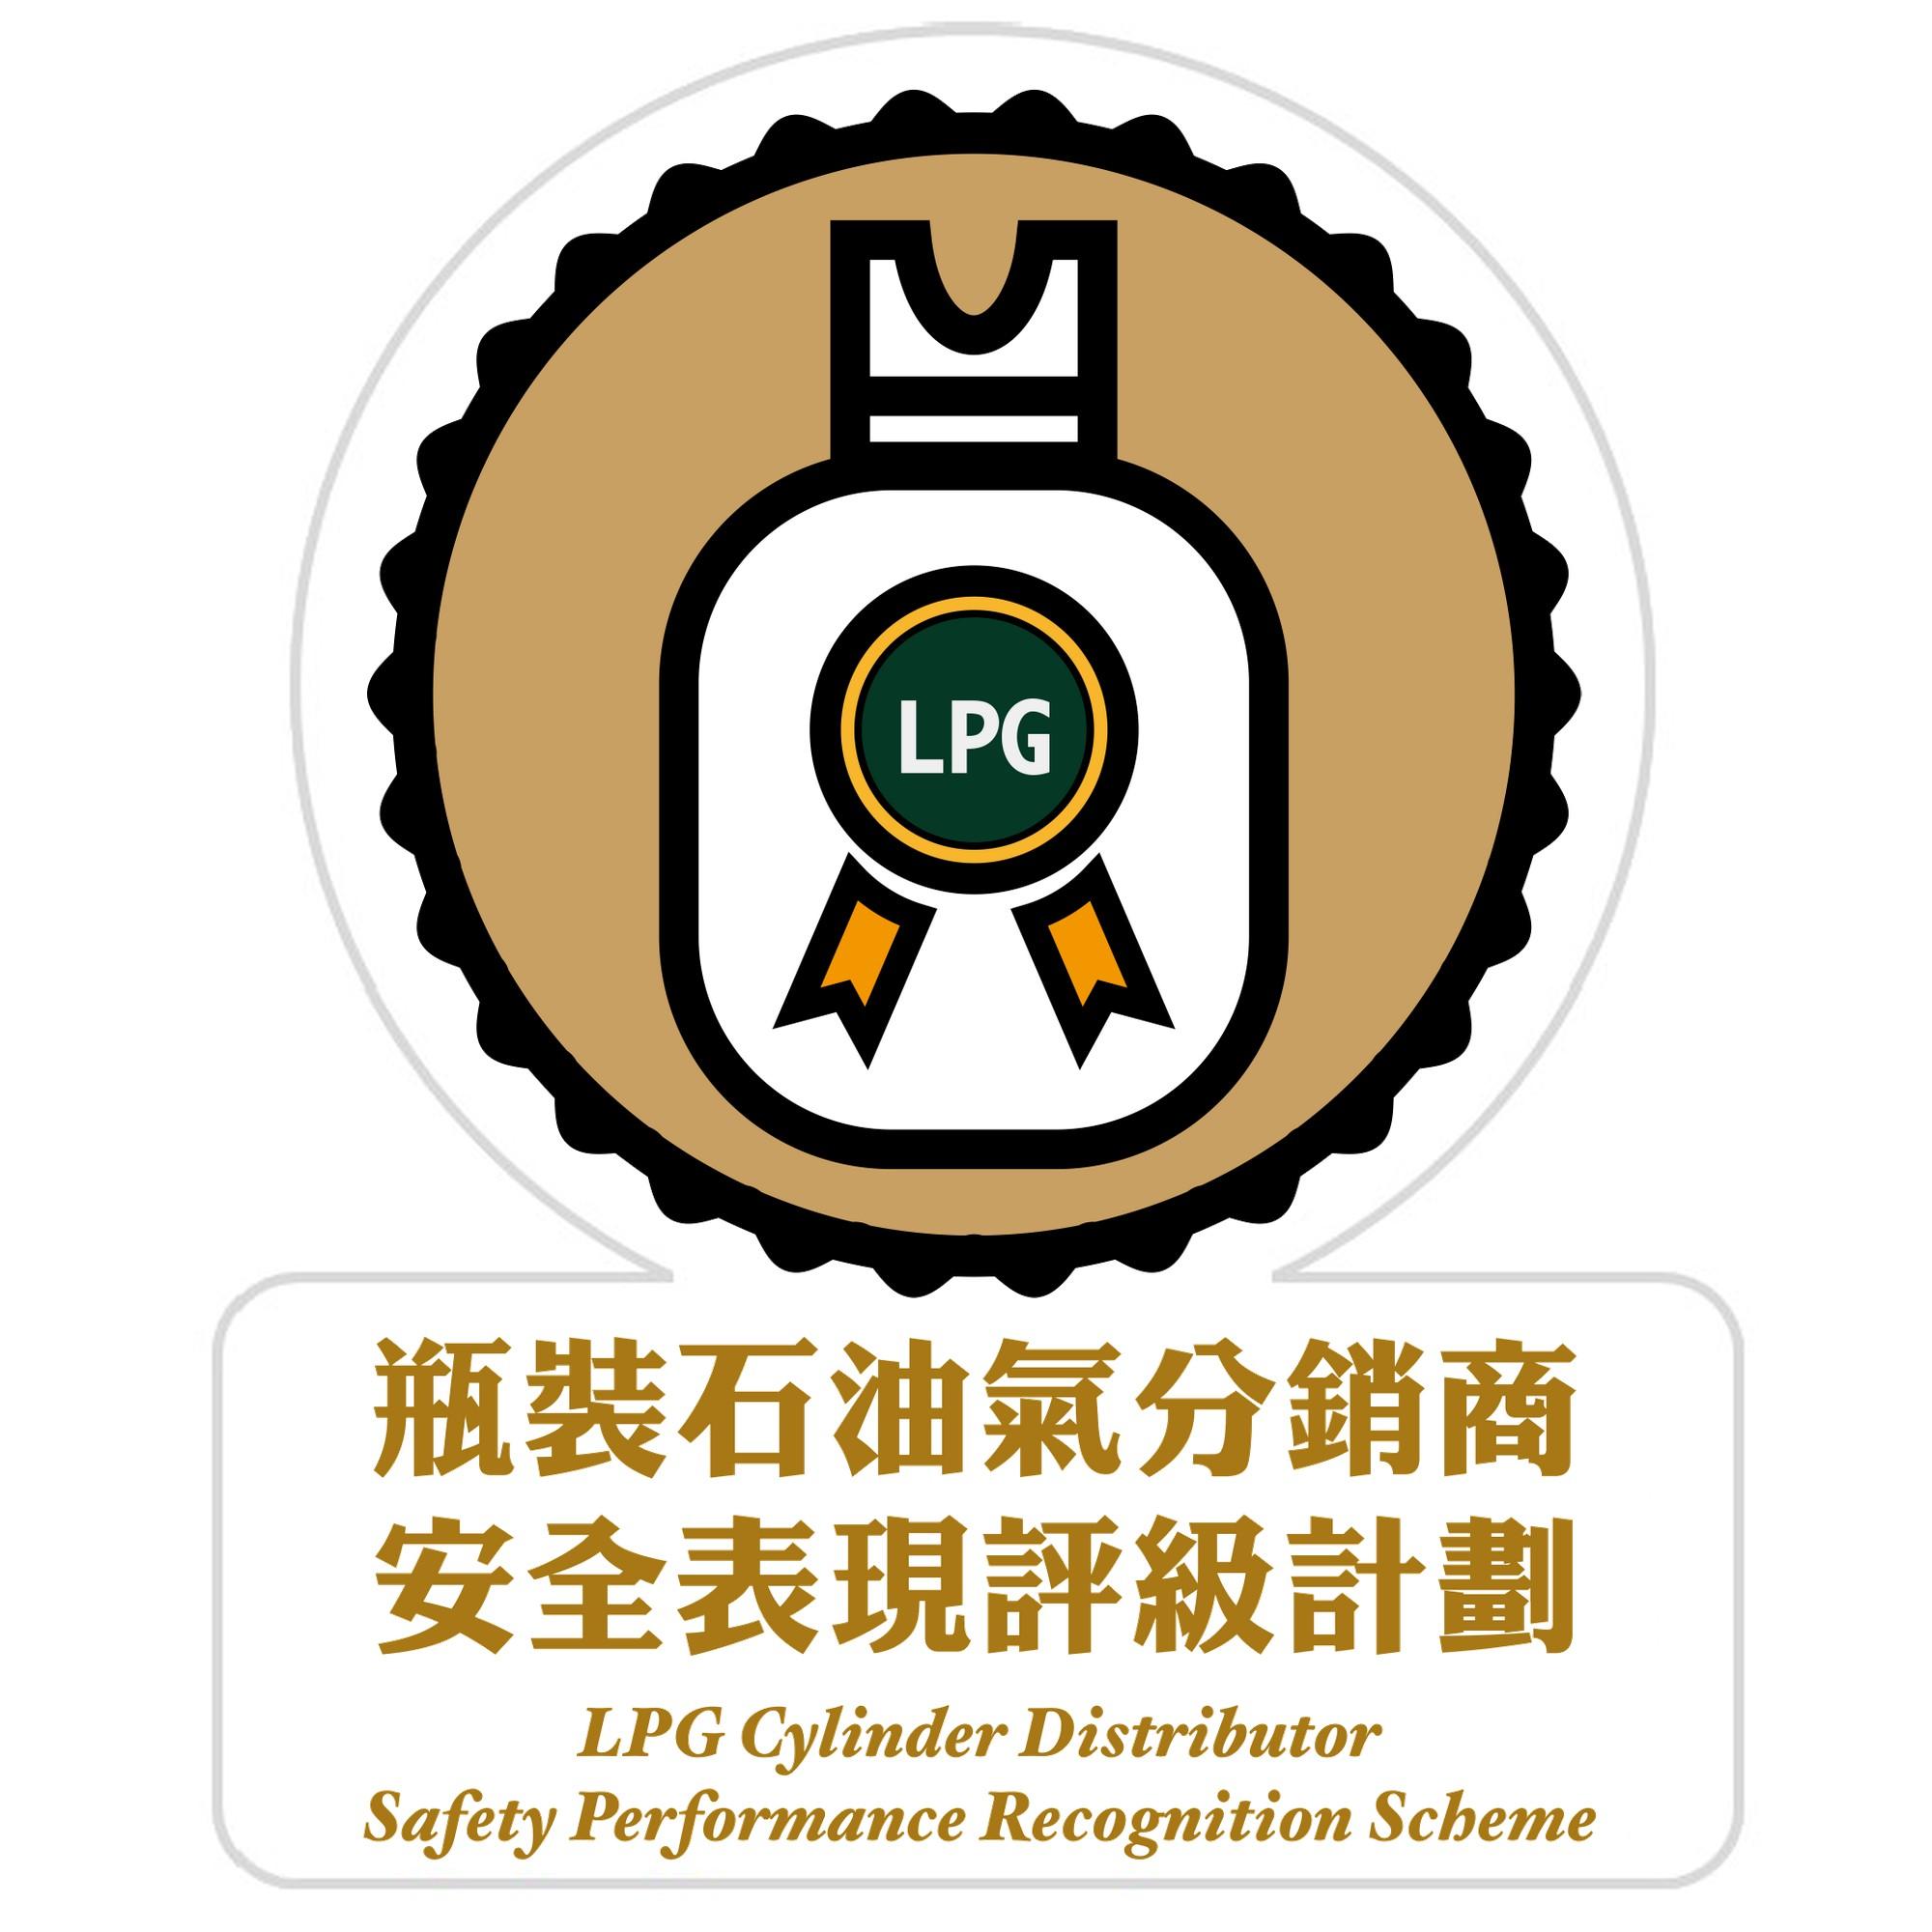 The Electrical and Mechanical Services Department announced today (April 29) the rating results of the Liquefied Petroleum Gas (LPG) Cylinder Distributor Safety Performance Recognition Scheme for 2021. Picture shows the logo of the LPG Cylinder Distributor Safety Performance Recognition Scheme.